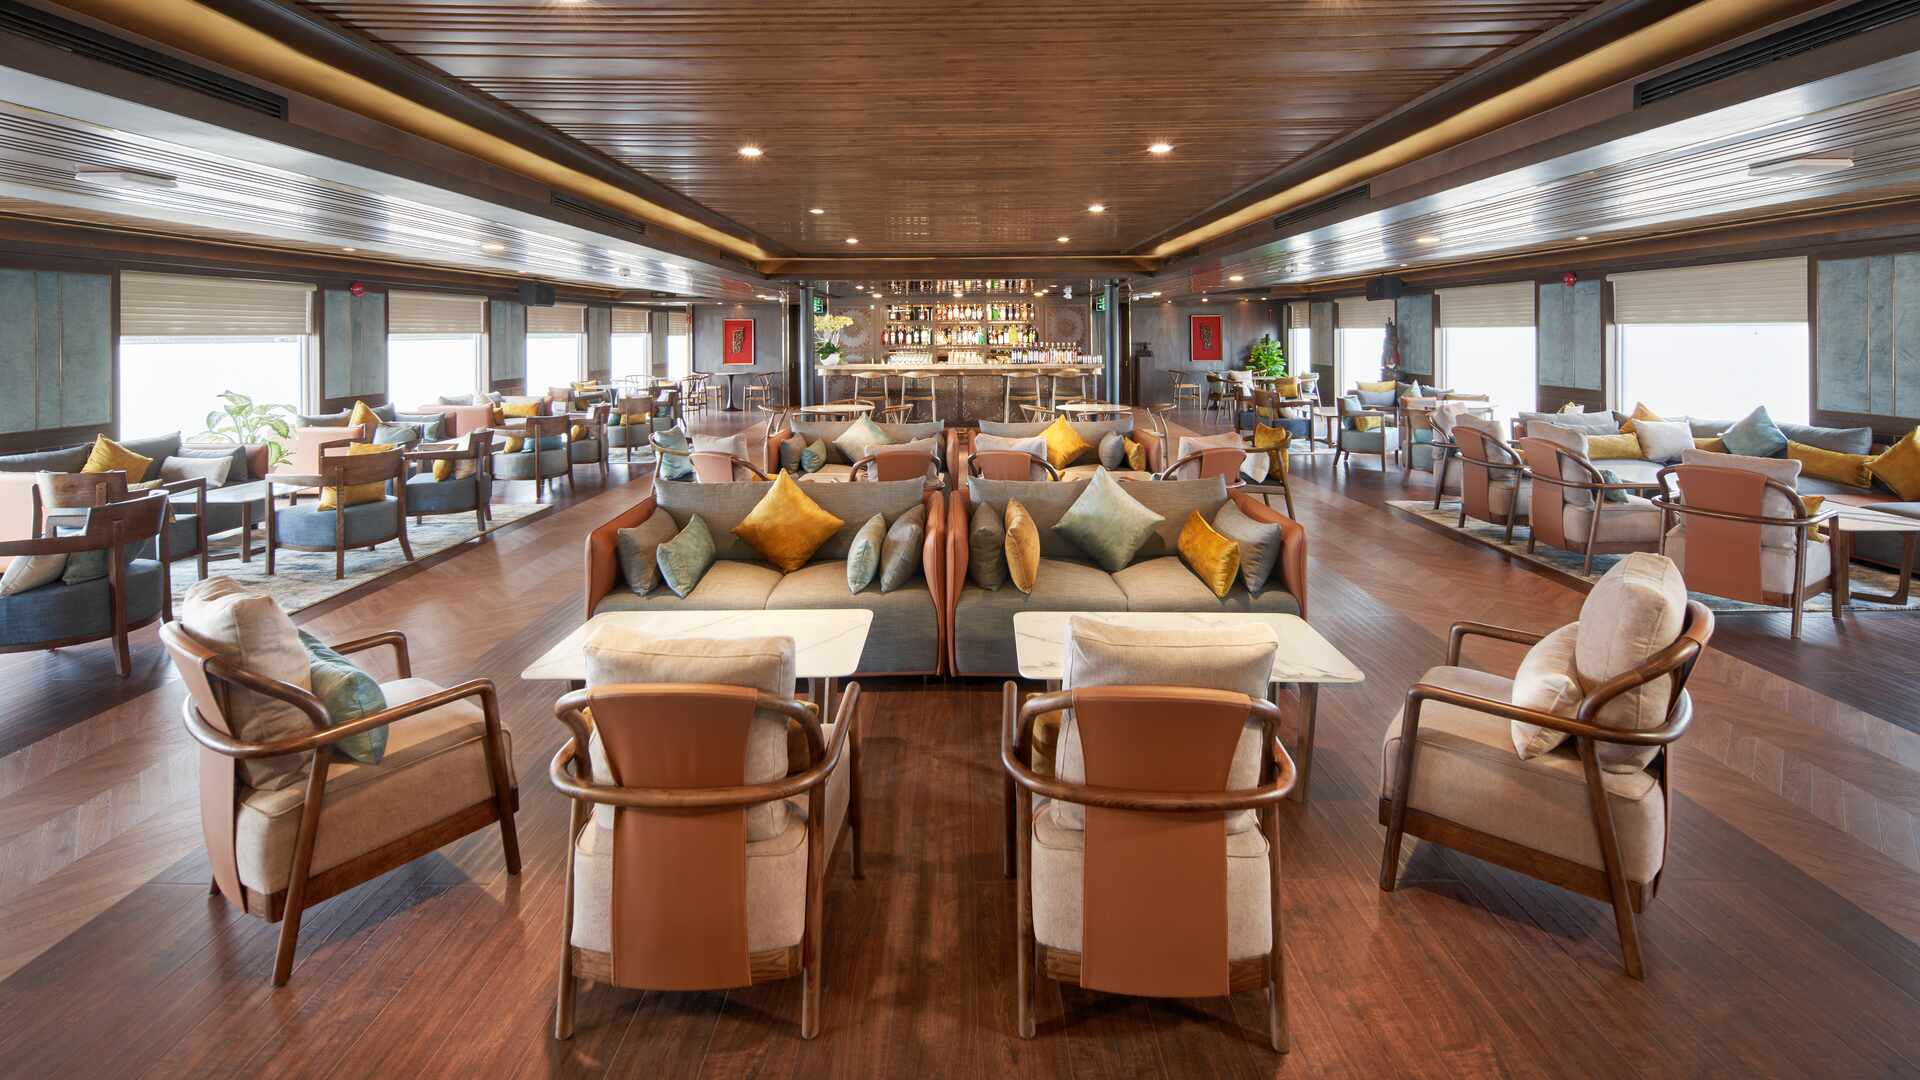 Harmony lounge and bar onboard the Mekong Serenity